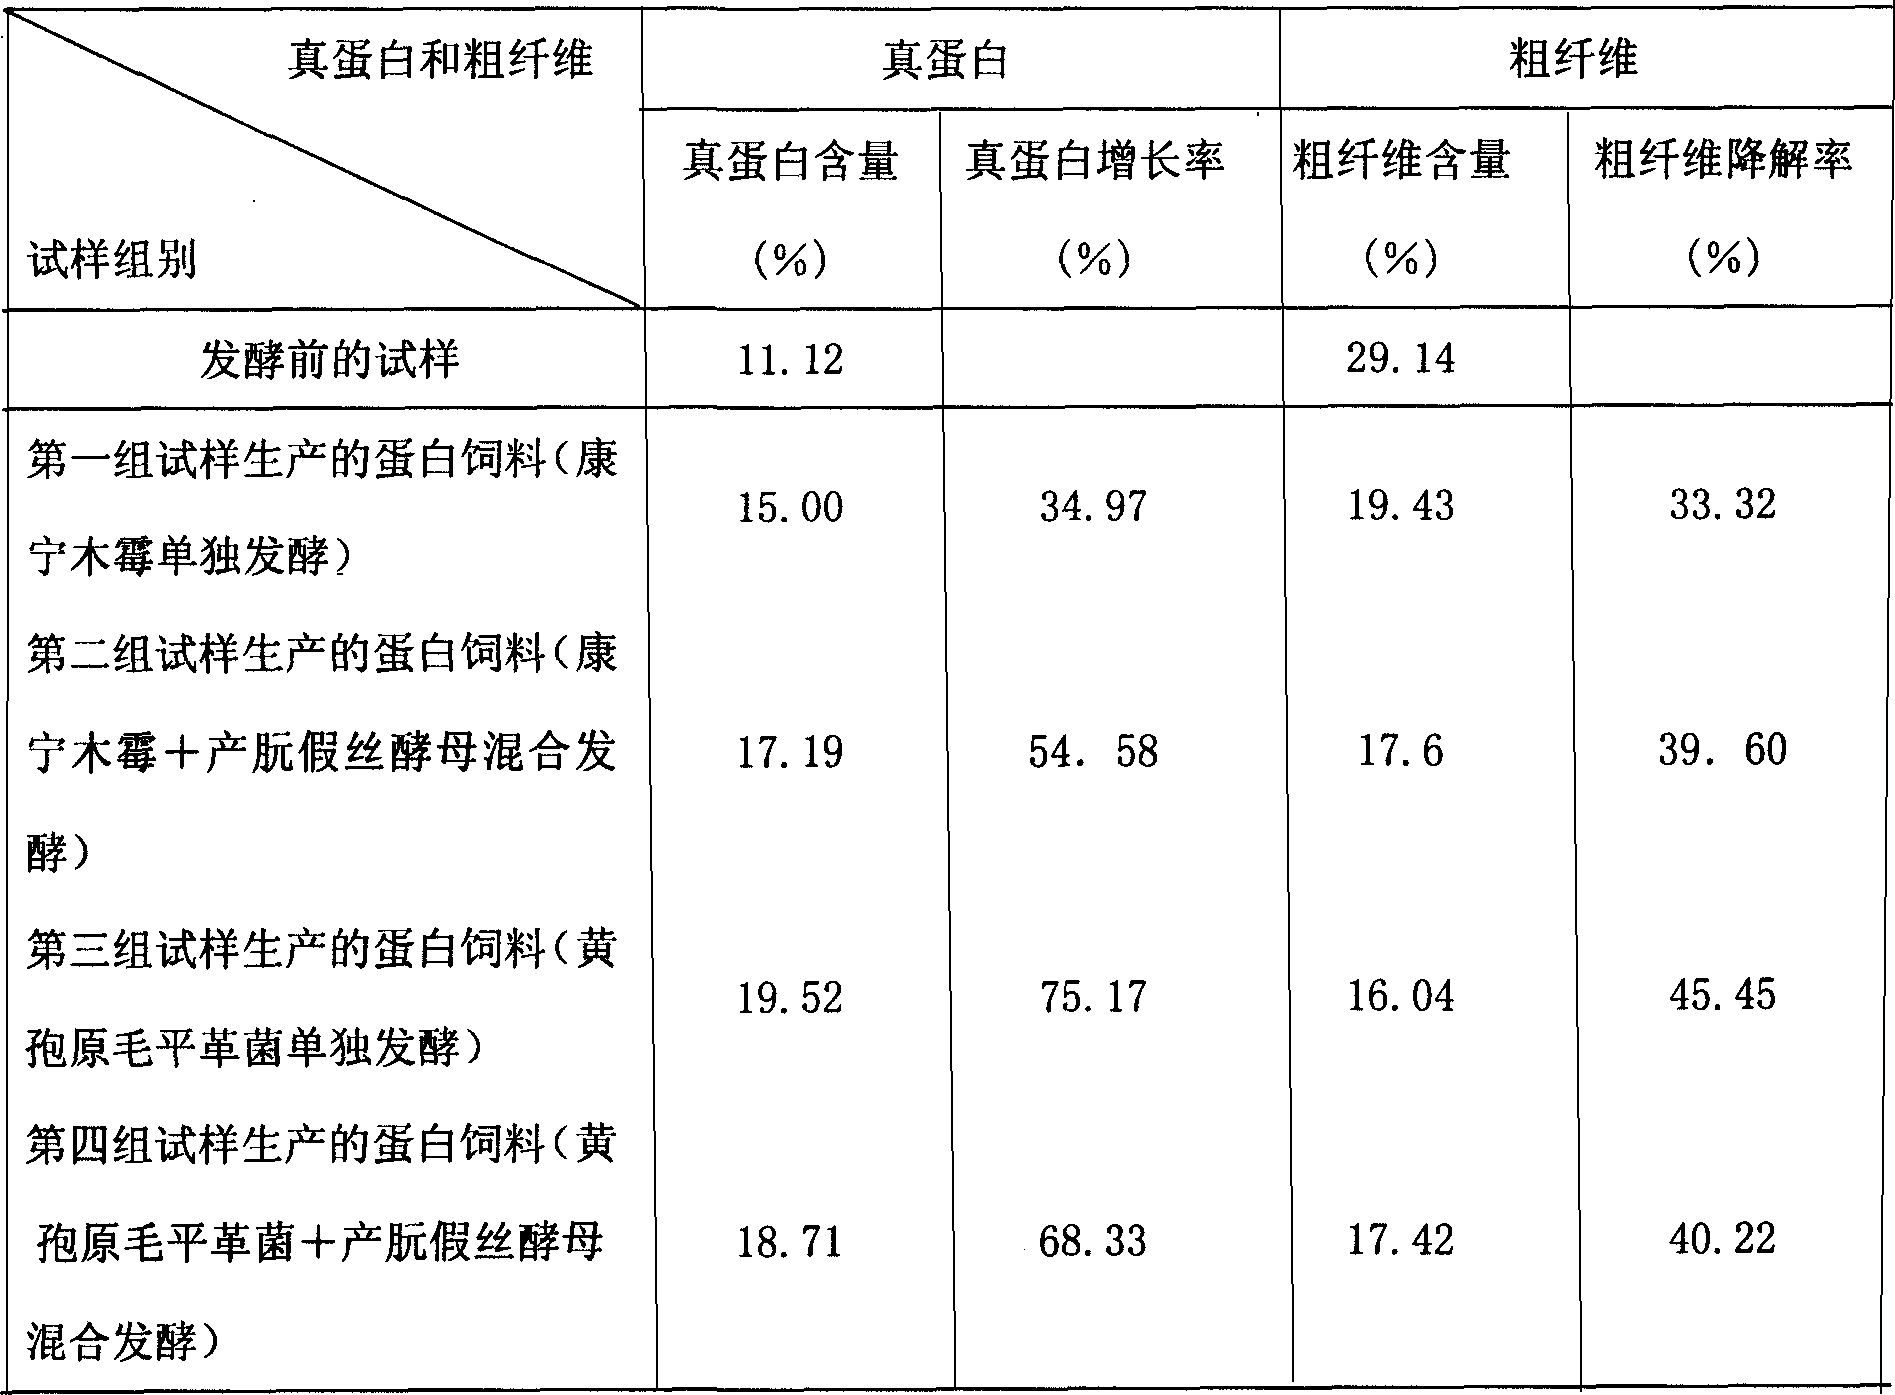 Process for producing protein feed stuff by traditional Chinese medicine slag